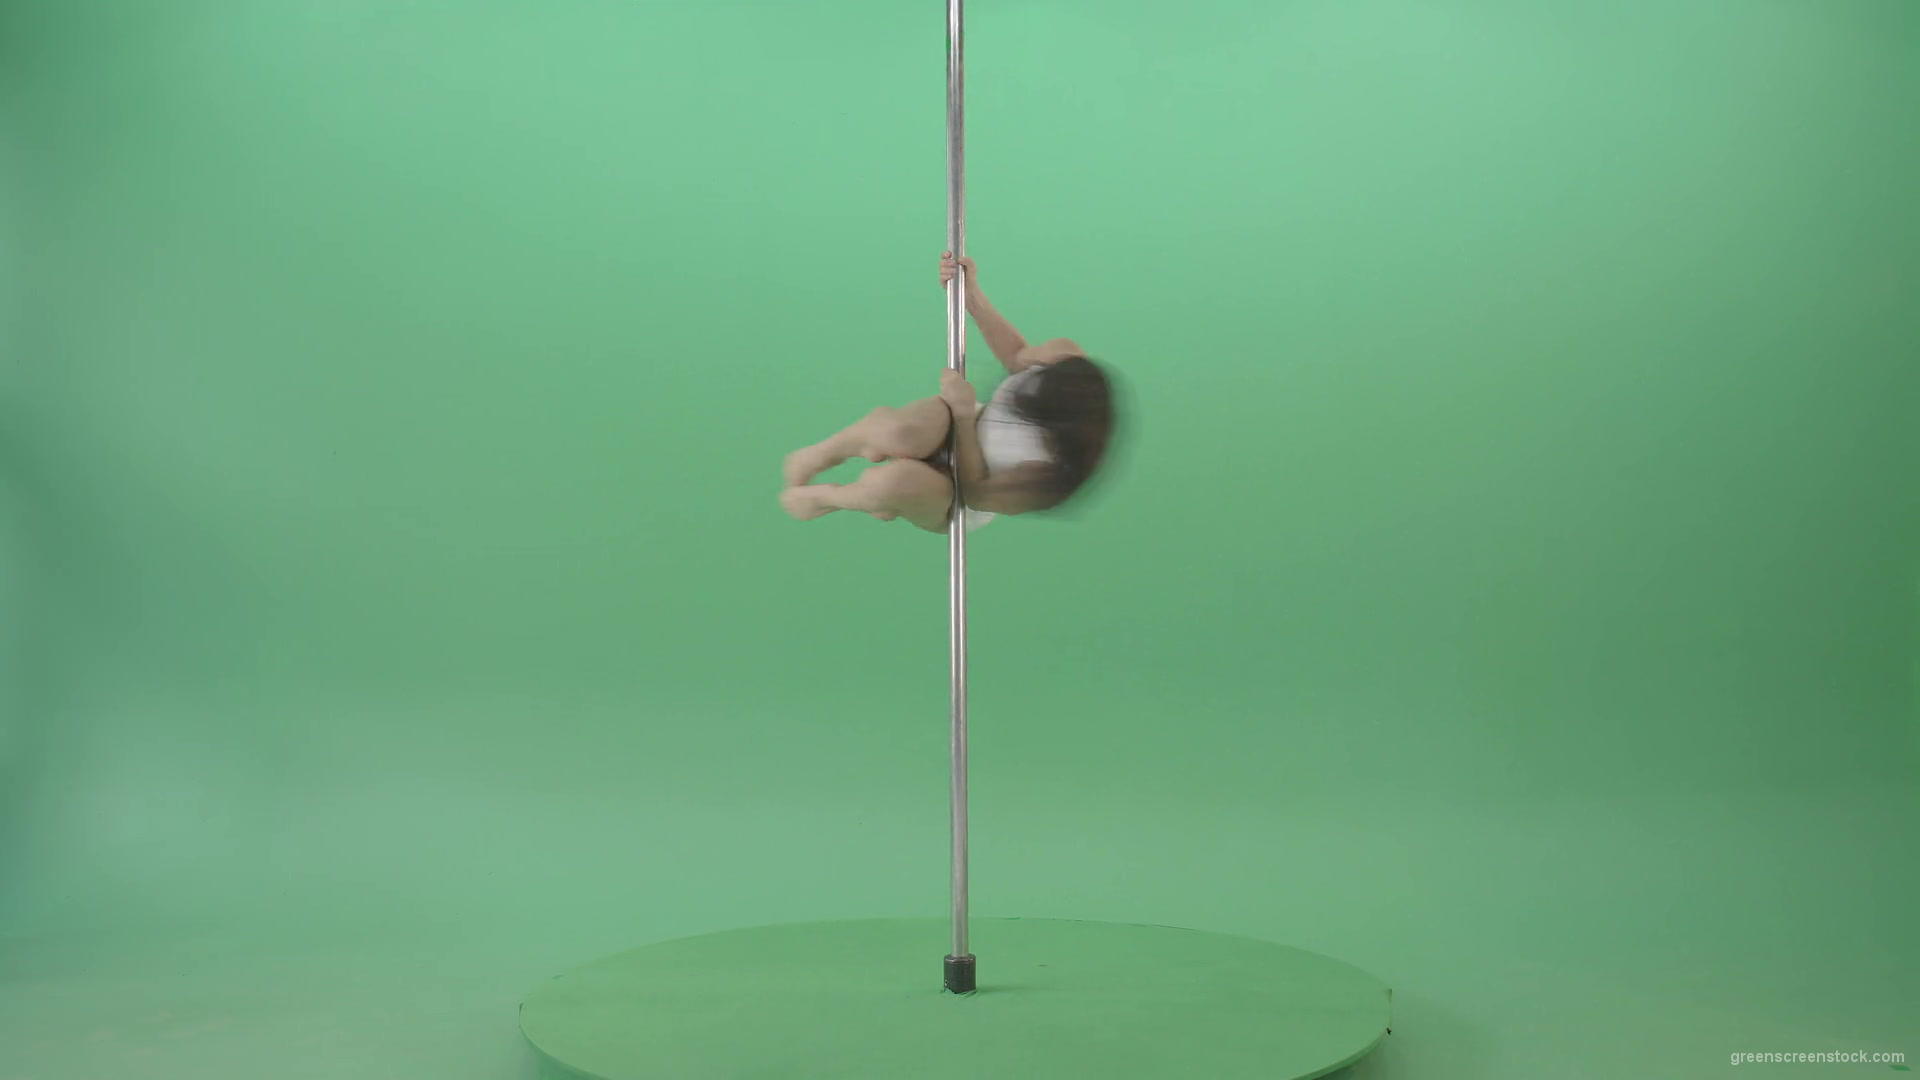 Go-Go-Girl-in-white-dress-spinning-on-the-pole-and-sit-on-a-twine-on-green-screen-4K-Video-Footage-1920_004 Green Screen Stock